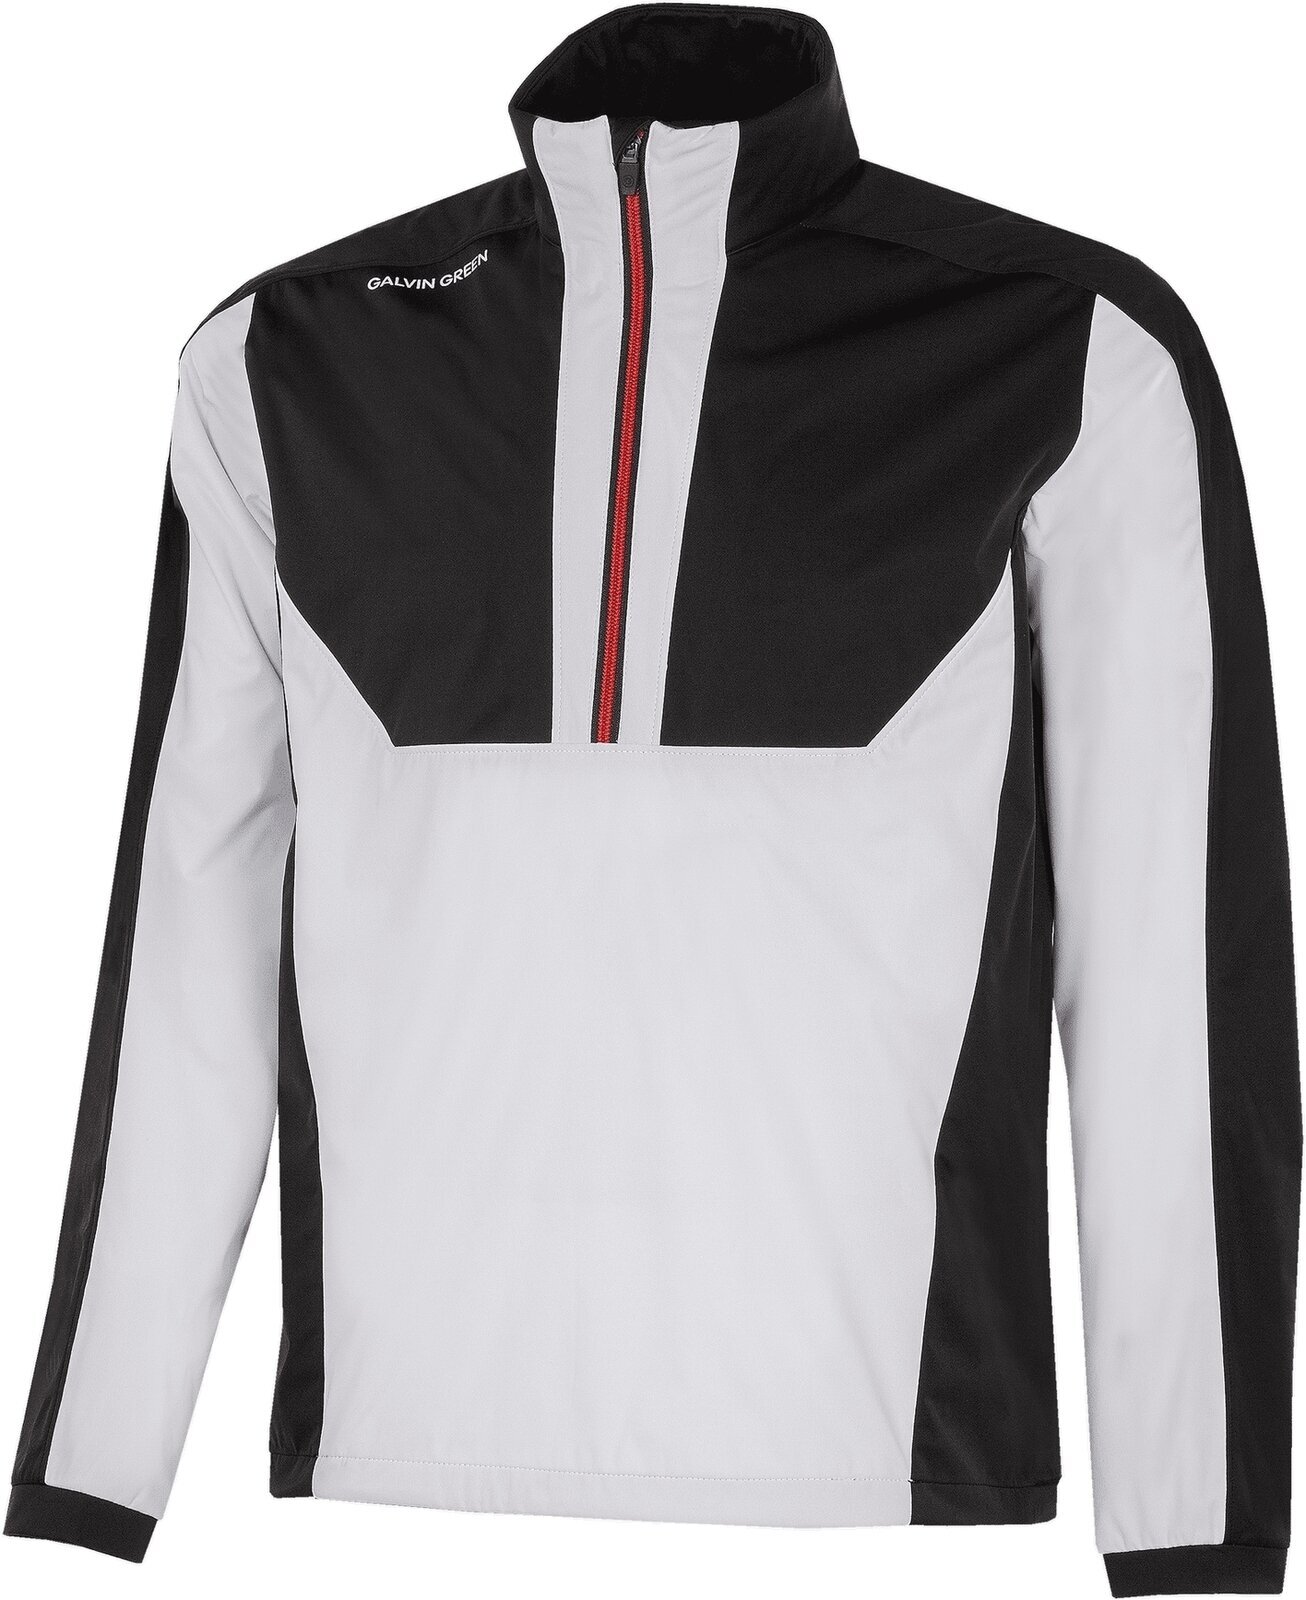 Jacket Galvin Green Lawrence Mens Windproof And Water Repellent Jacket White/Black/Red L